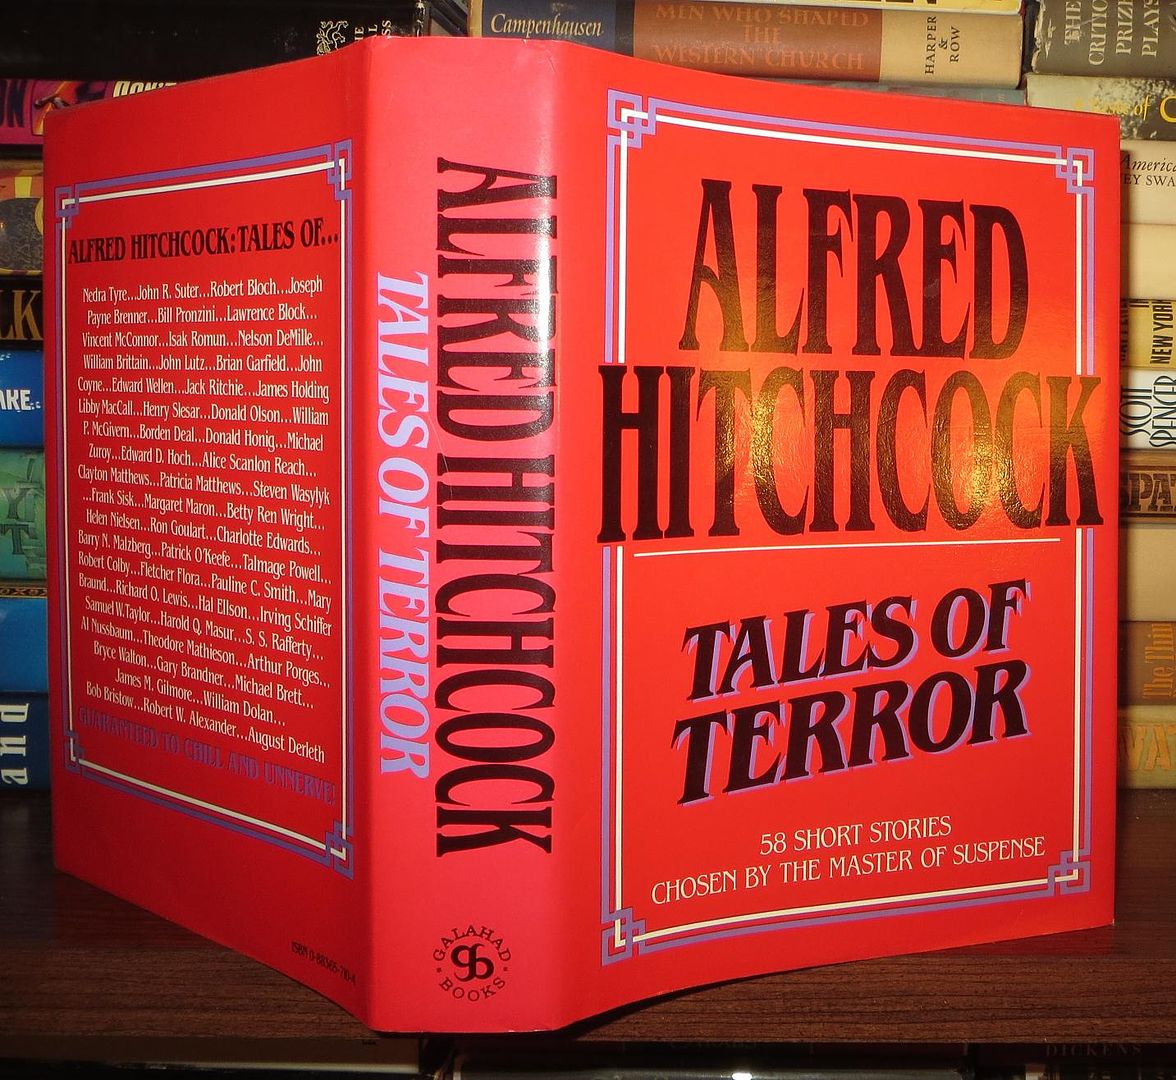 HITCHCOCK, ALFRED - Tales of Terror 58 Short Stories Chosen by the Master of Suspense